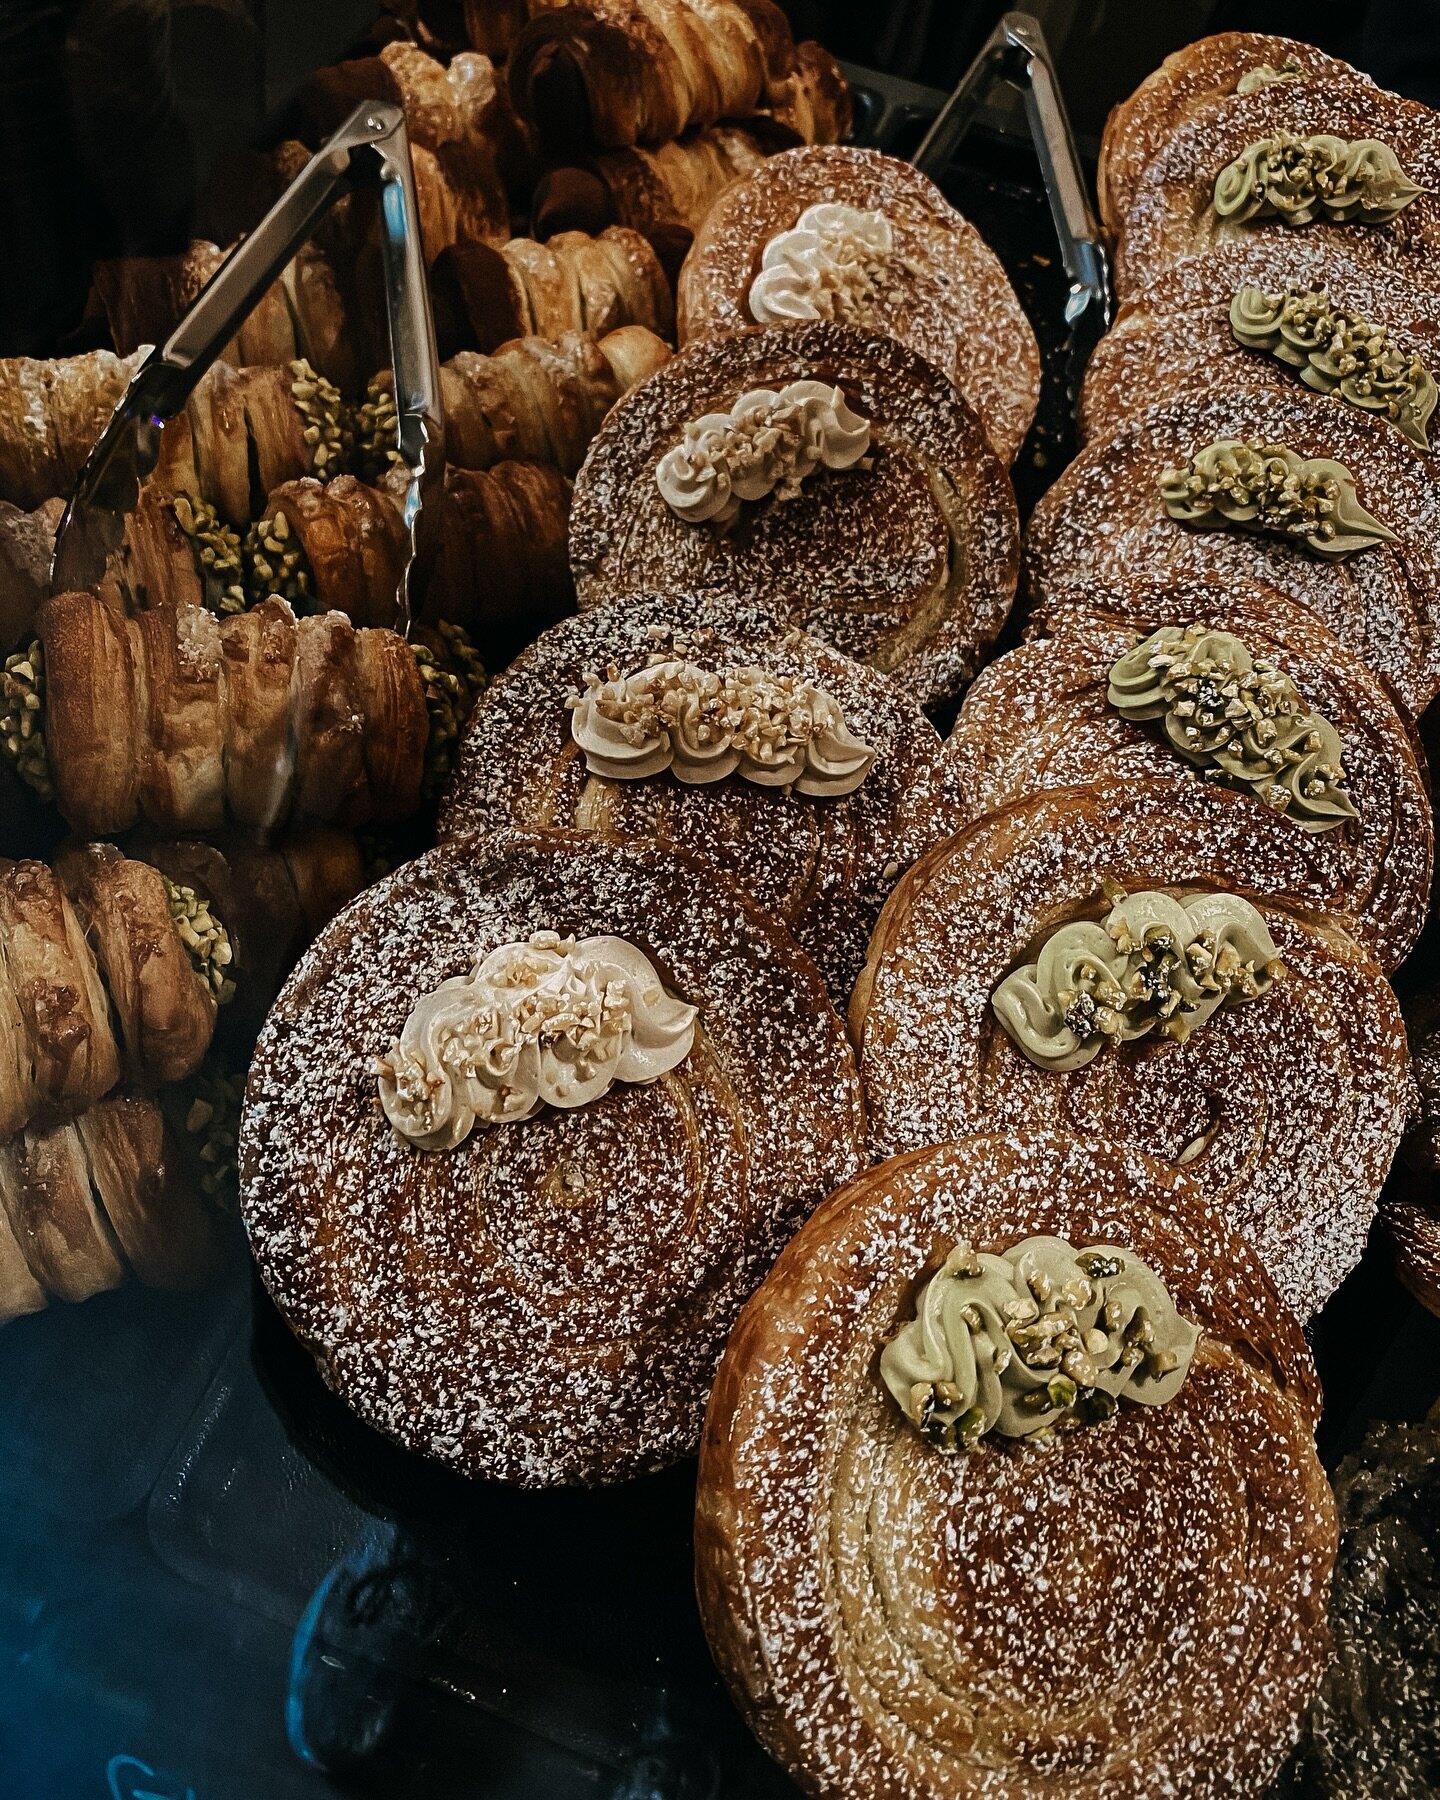 G i r e l l e 🍭

Share some love for your fav item since day 1 🖤
Our Girelle are made with laminated dough, filled with soft pistachio or hazelnut cream. Soft on the inside and crunchy on the outside 🥰

#thesanctuaryberlin#thesanctuaryveganbakery#